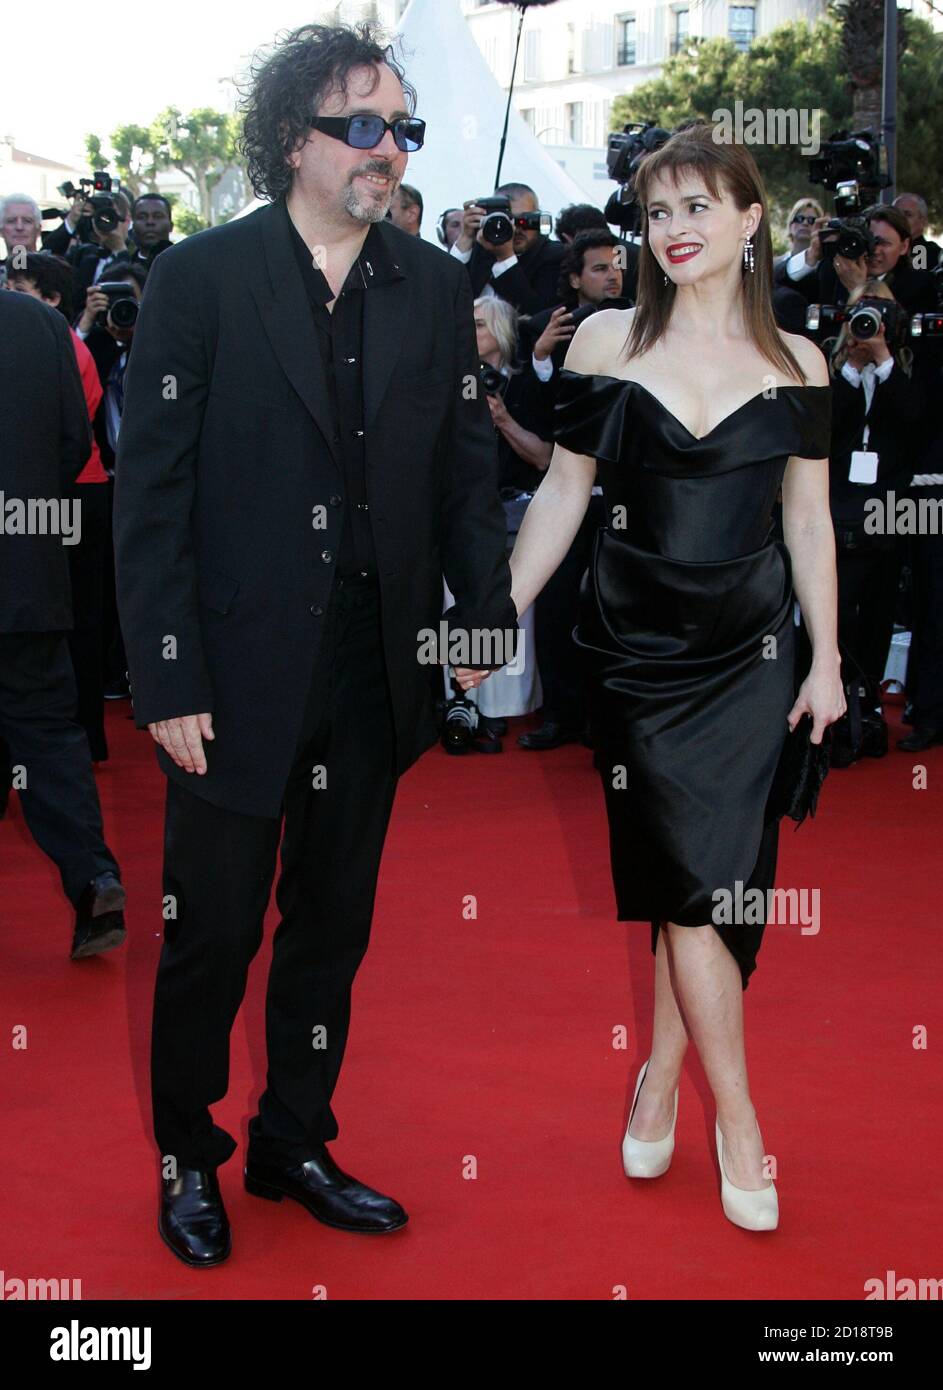 U.S. director Tim Burton (L) arrives with his wife, British actress and  jury member Helena Bonham Carter, at the screening of Spanish director  [Pedro Almodovar's] in-competition film 'Volver' at the 59th Cannes